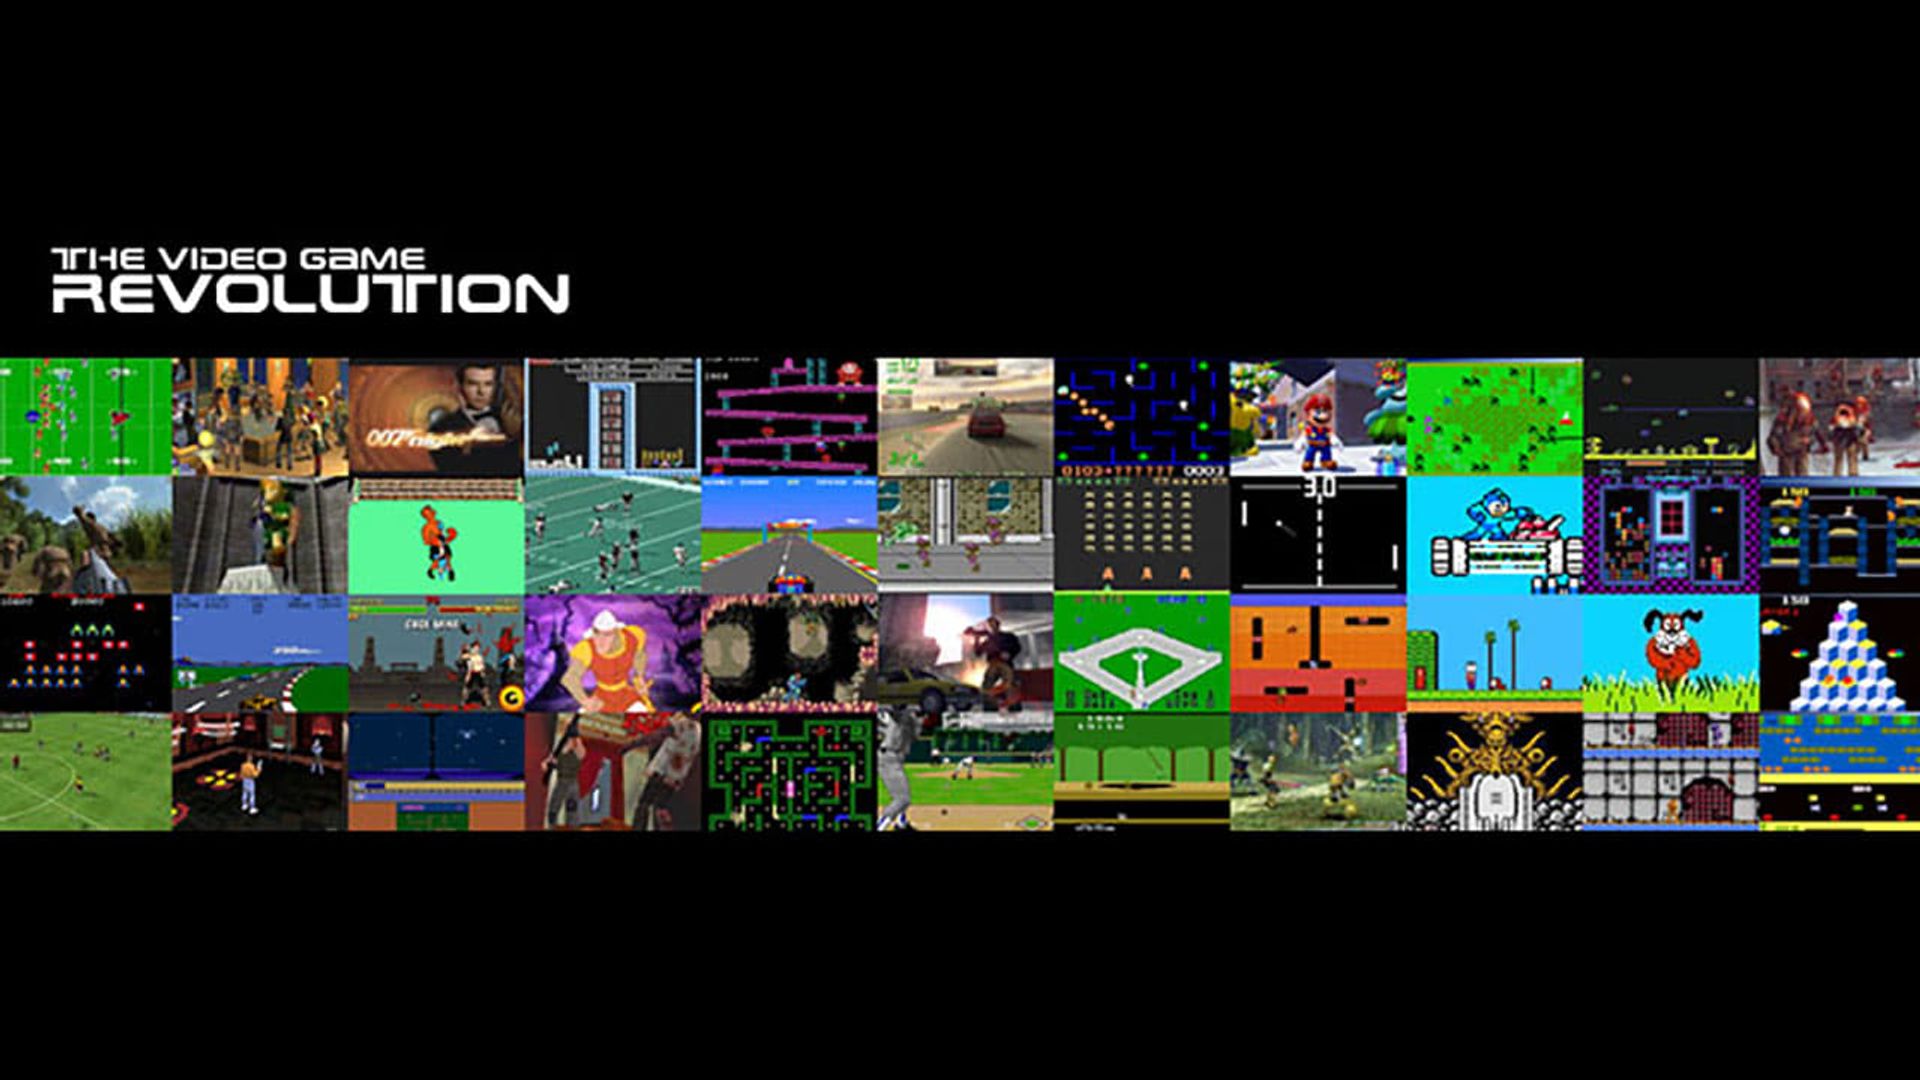 The Video Game Revolution background